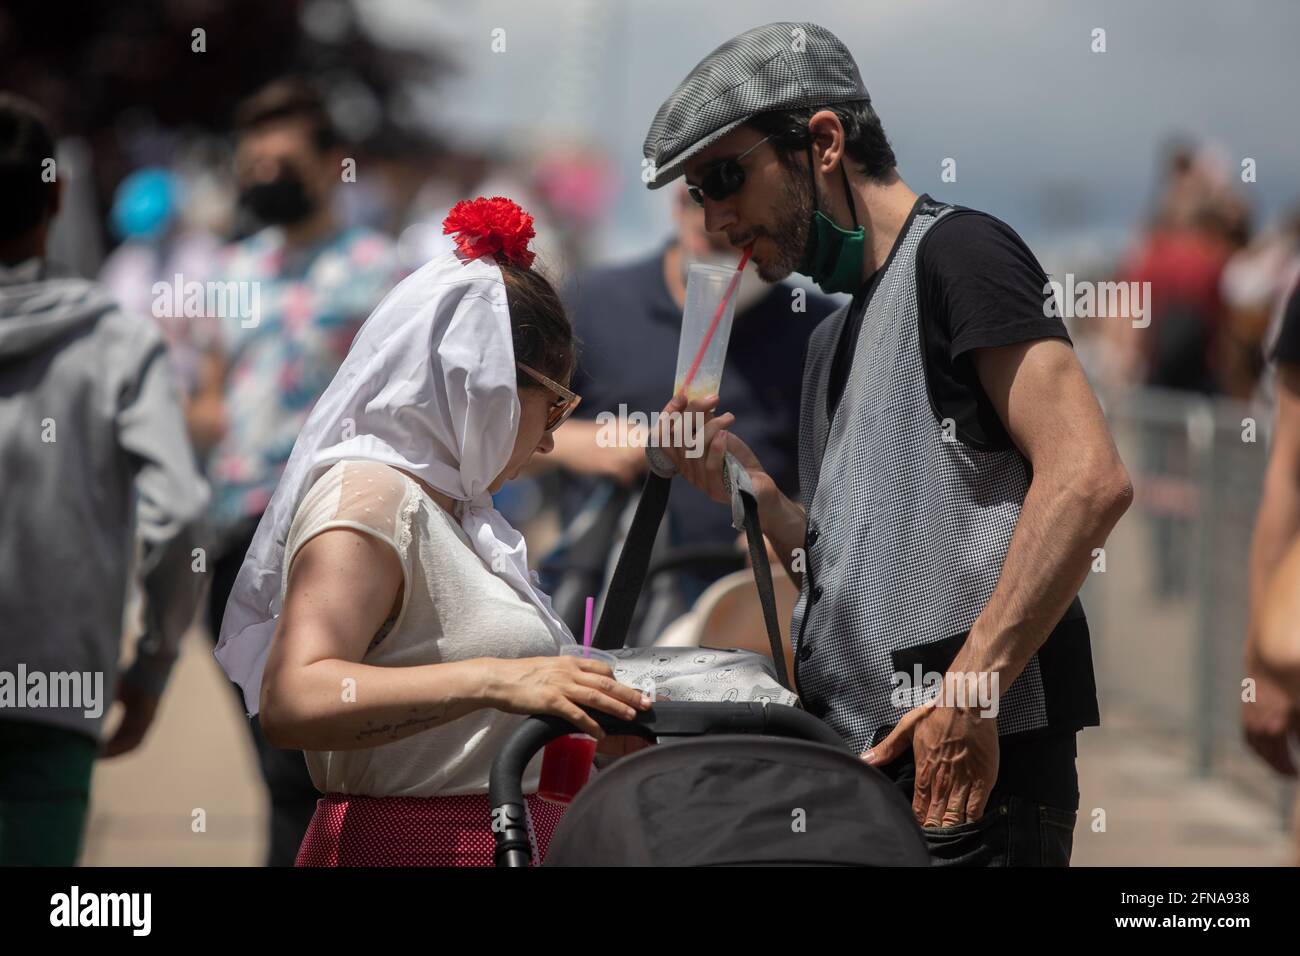 Madrid, Spain. 15th May, 2021. A couple dressed as chulapos seen during the San Isidro festivity in the IFEMA fairground.One of the most celebrated holidays of Madrid is the Feast Day of San Isidro which this year took place in the IFEMA fairground. (Photo by Guillermo Guterrez Carrascal/SOPA Images/Sipa USA) Credit: Sipa USA/Alamy Live News Stock Photo